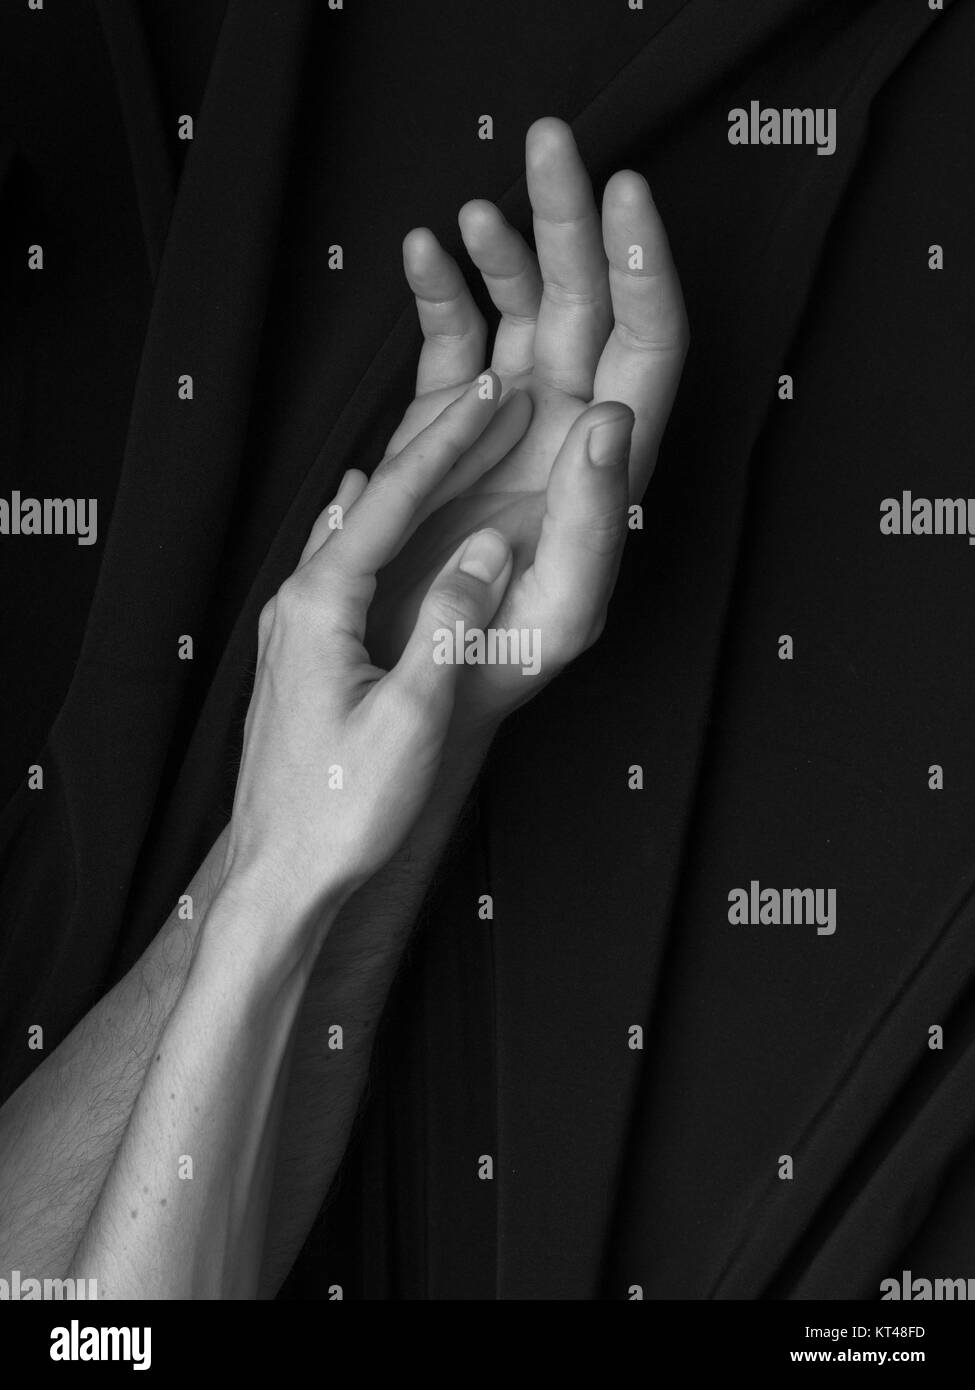 Black and white image, hands of man and woman tenderly touching each other on black background Stock Photo